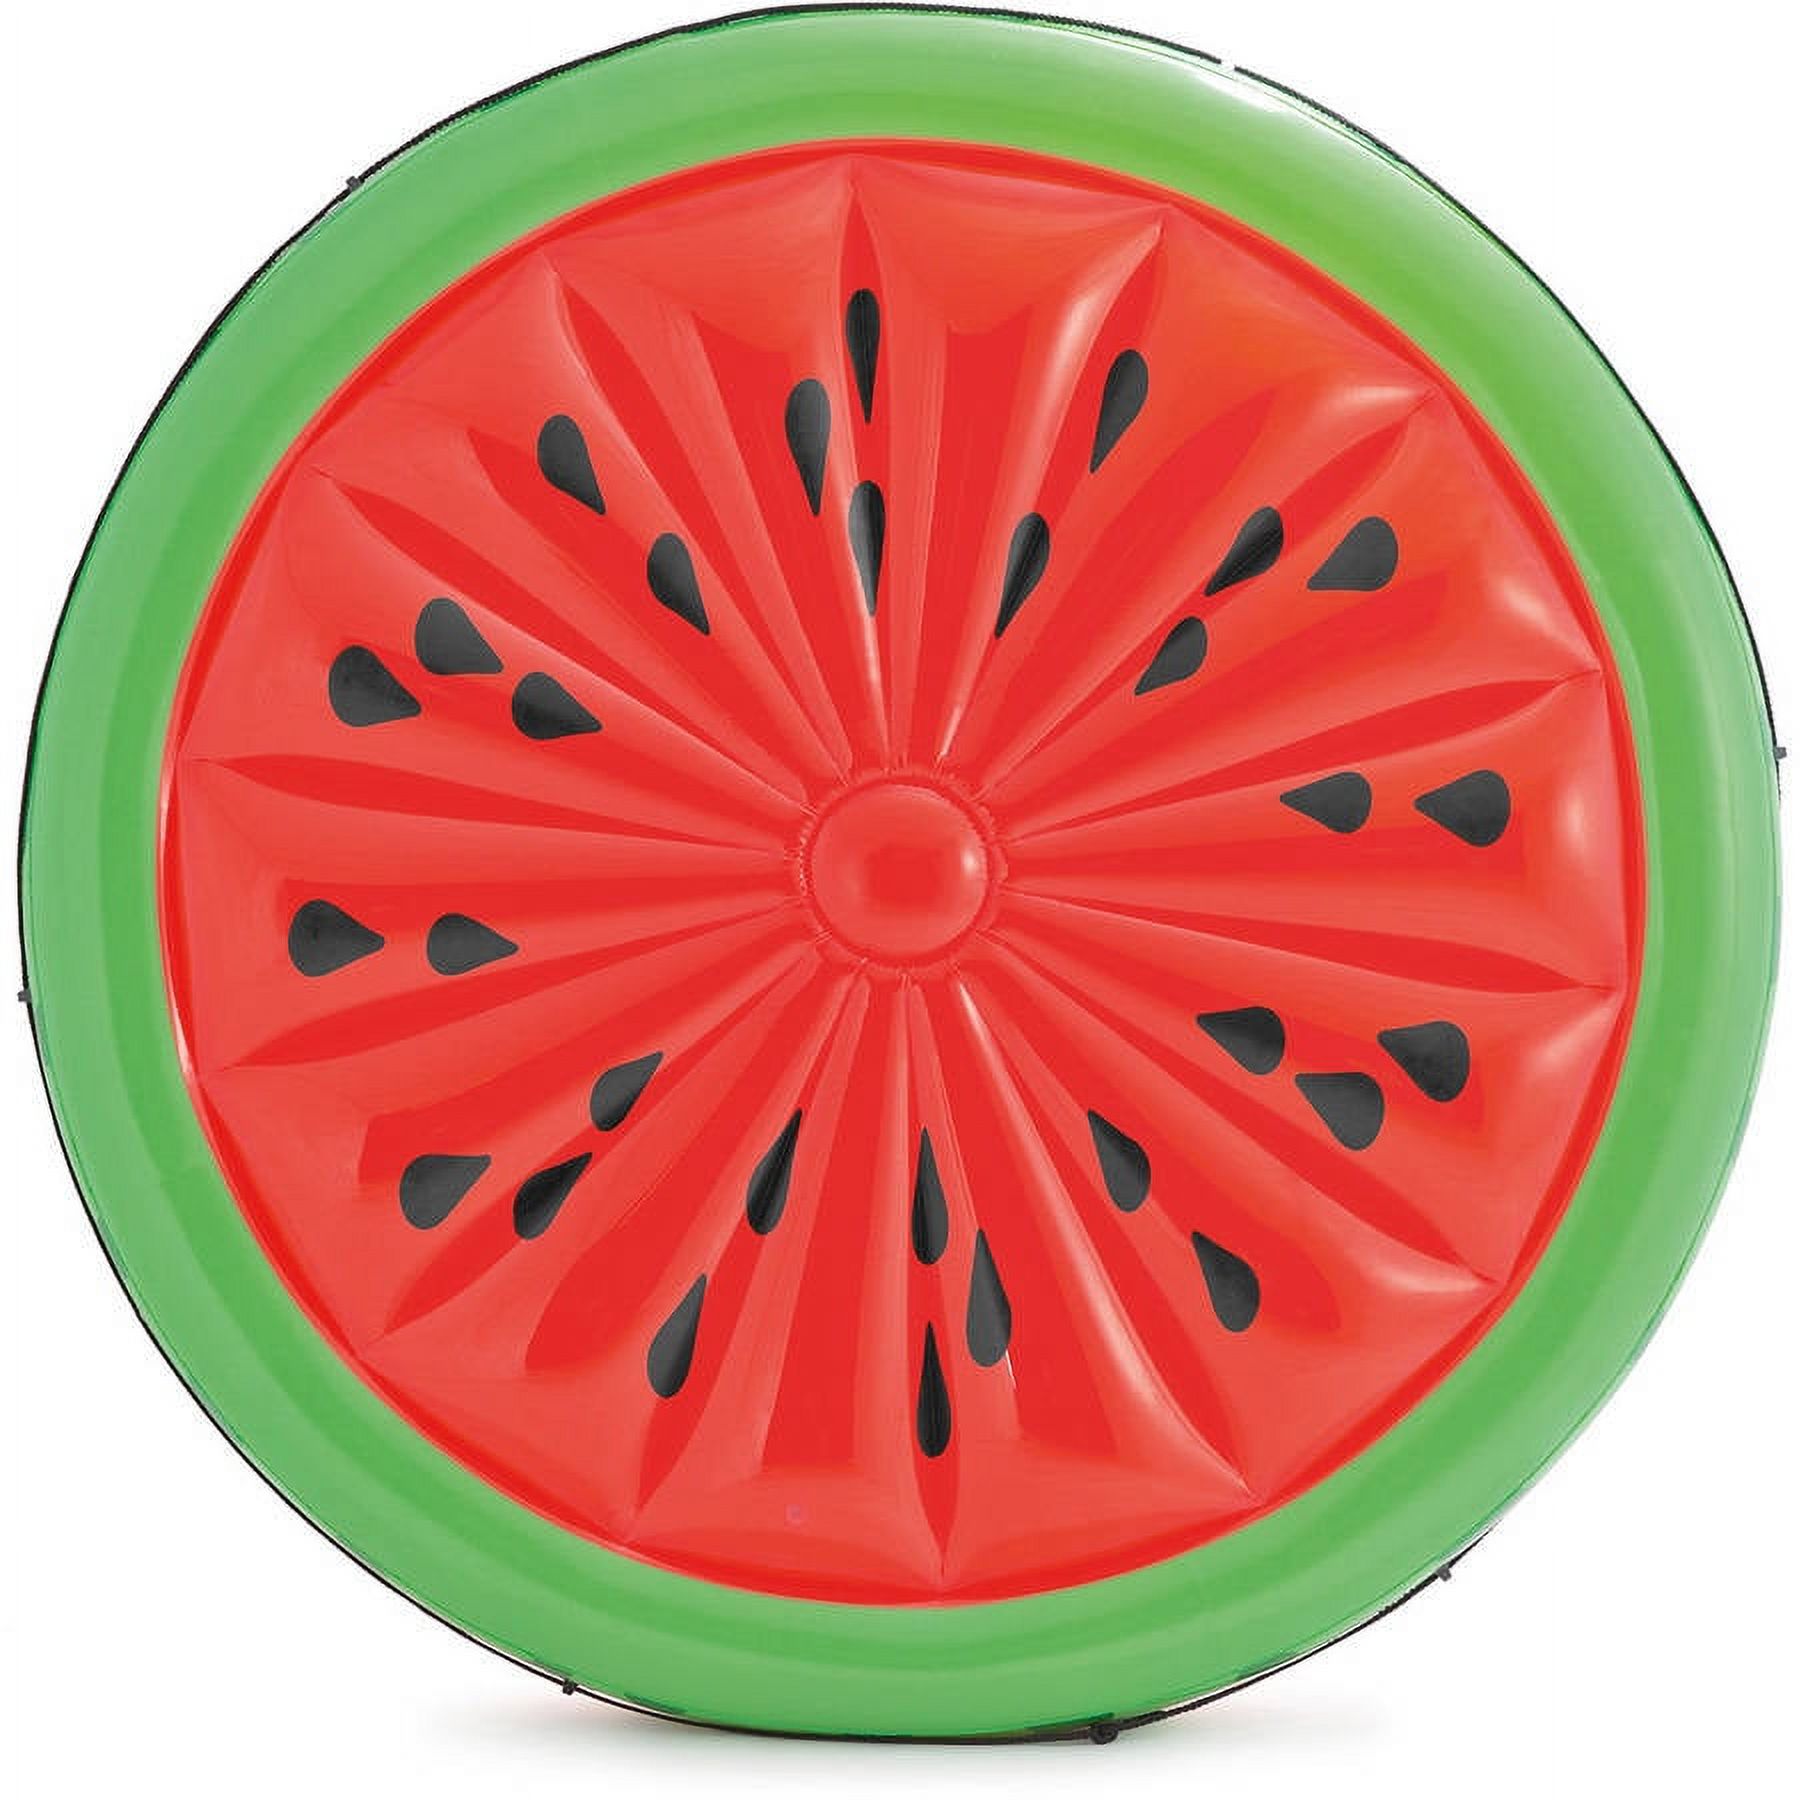 Intex Giant Inflatable 72 Inch Watermelon Island Summer Swimming Pool Float Raft - image 1 of 3